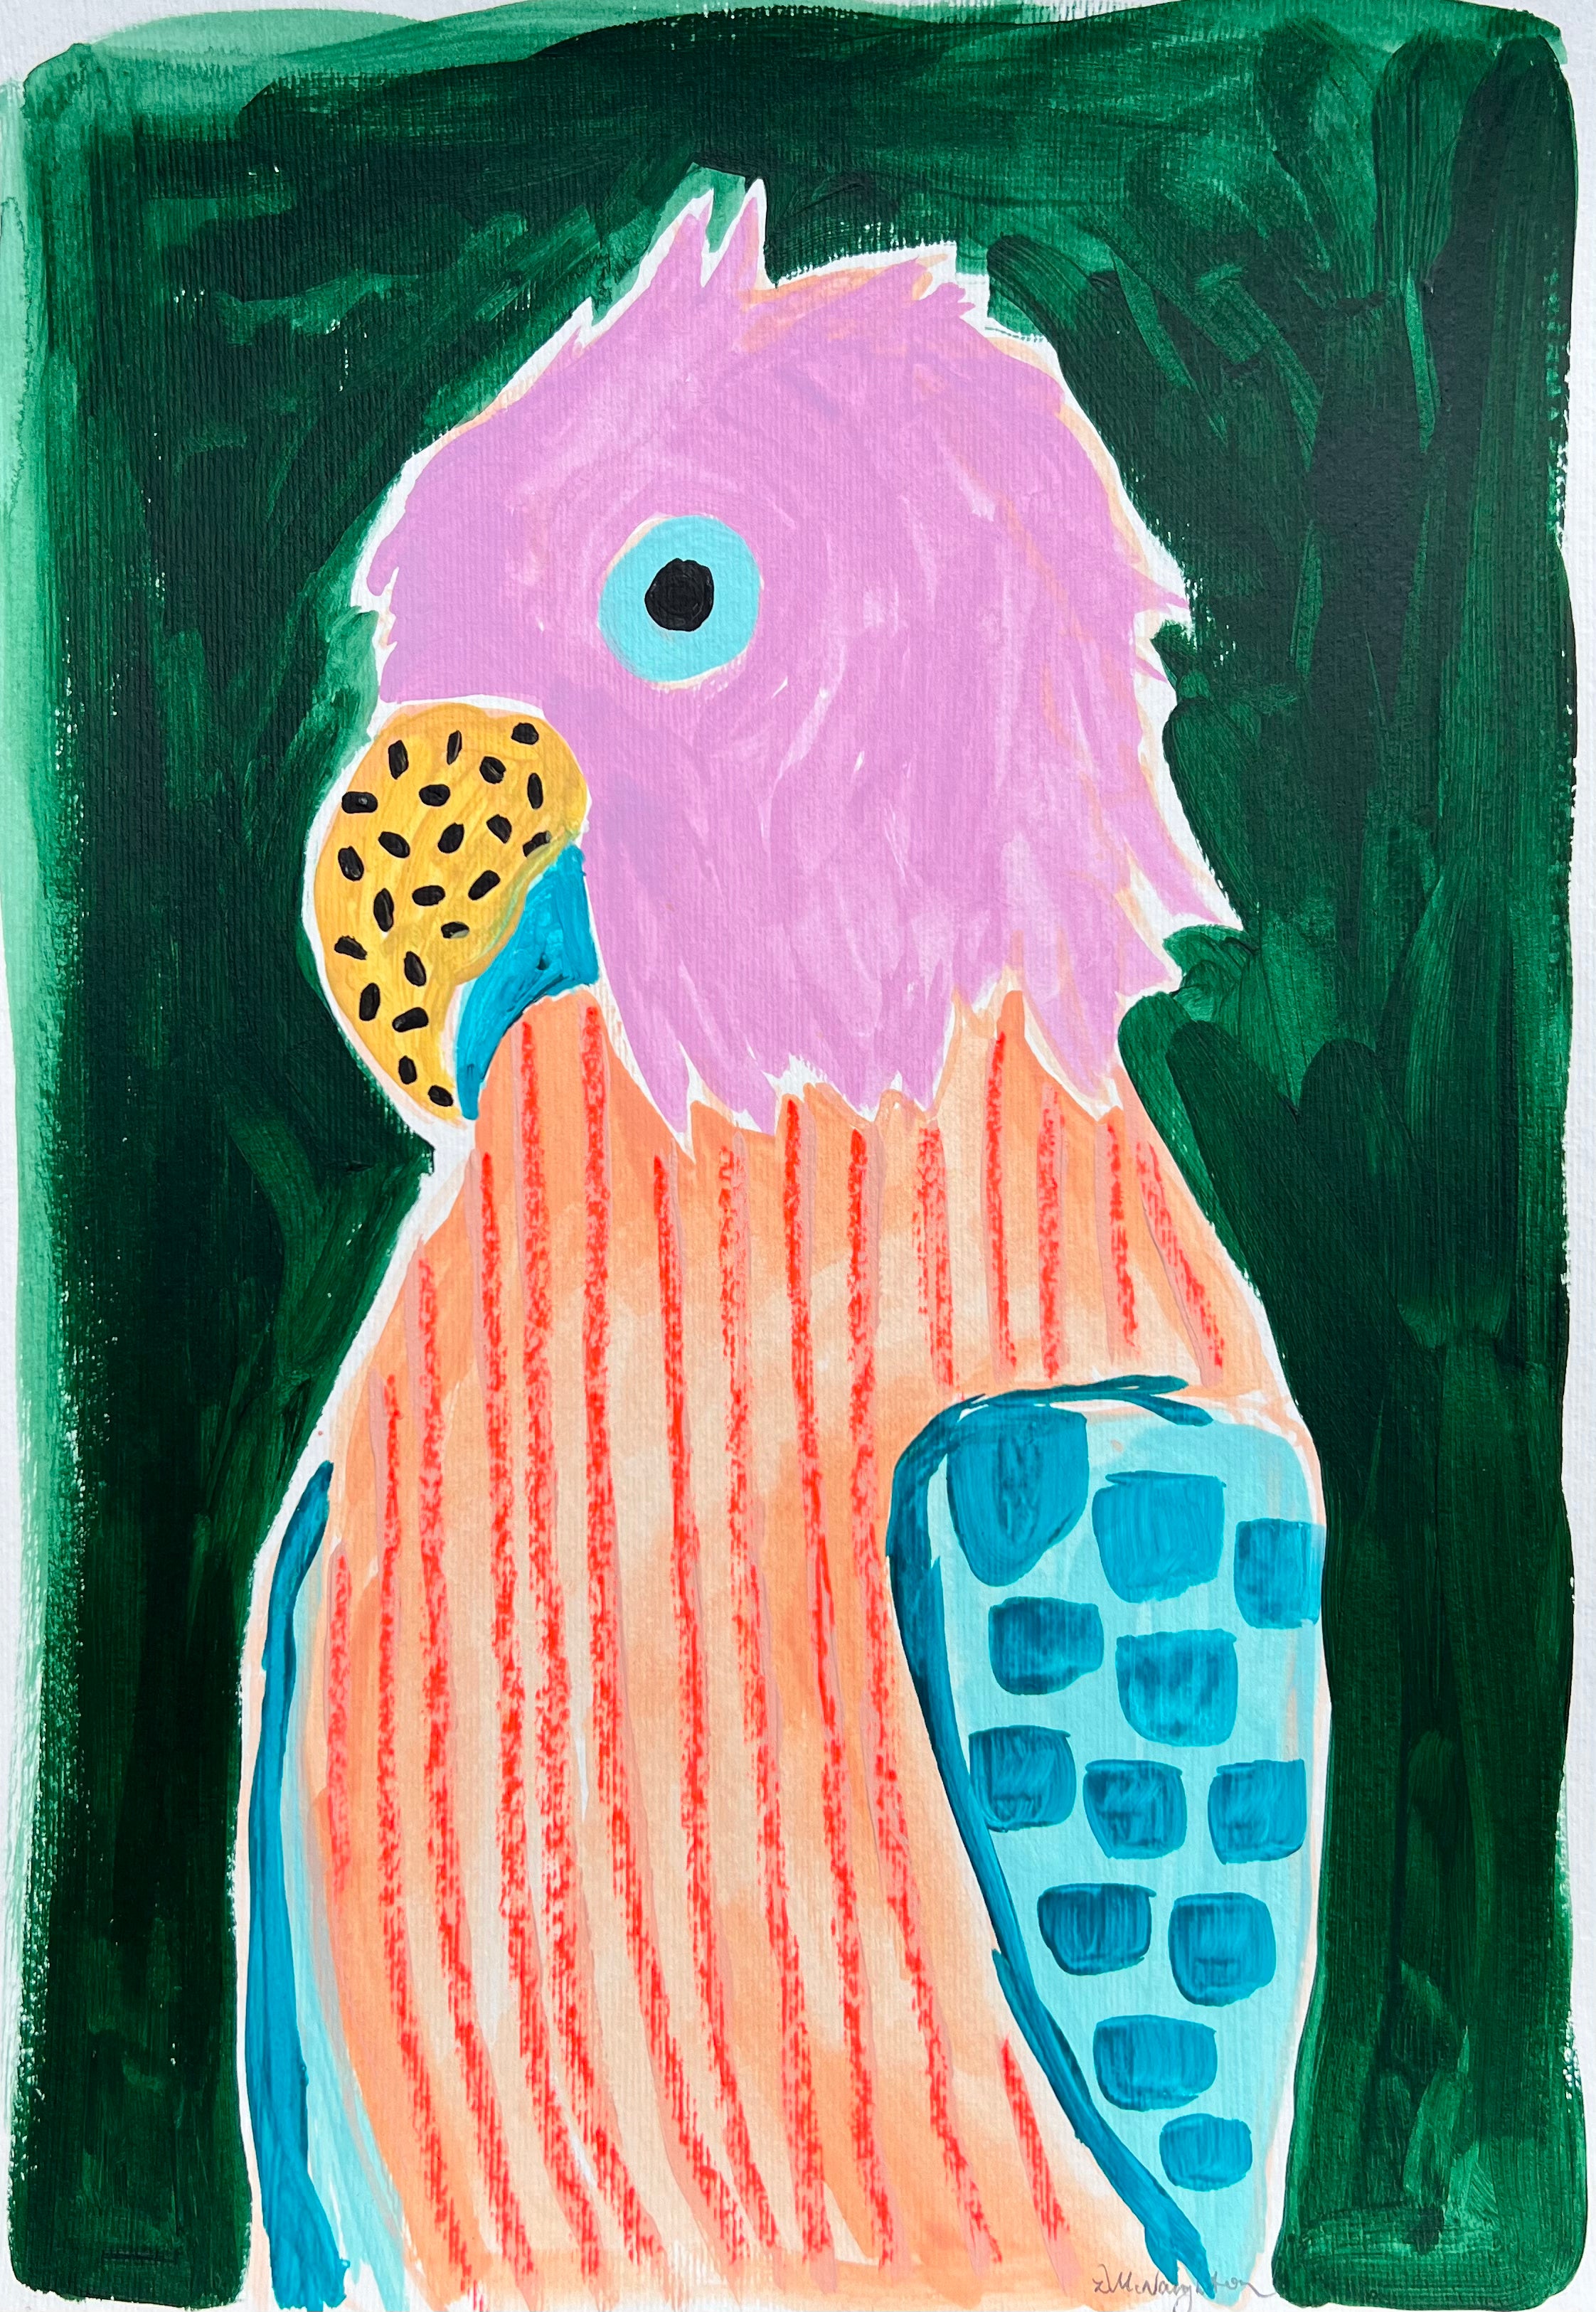 'POLLY' Original A3 Mixed Media on Paper